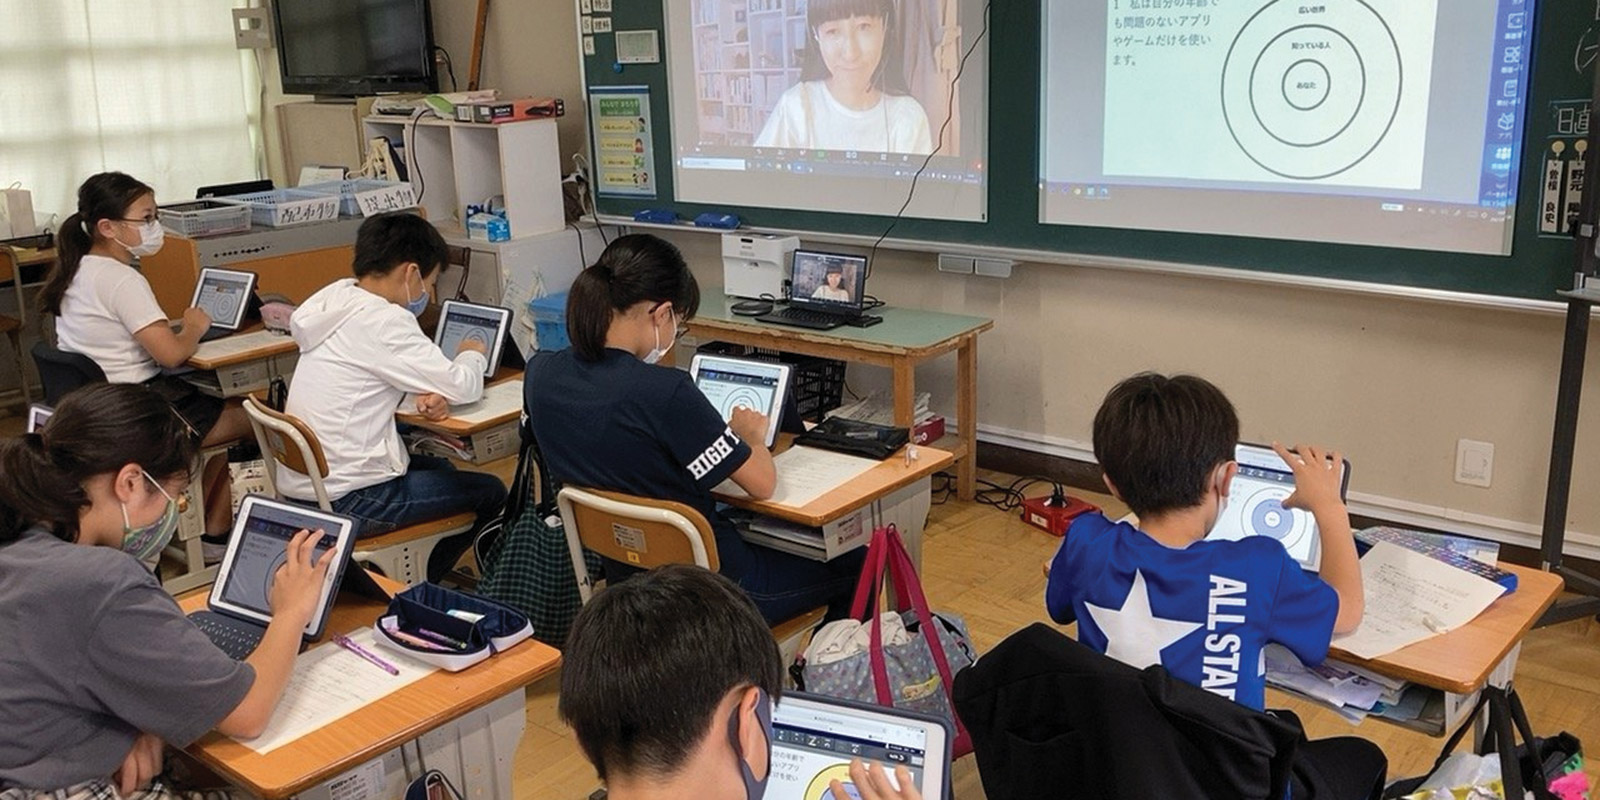 Students at Kitayamada Elementary School in Suita learning about digital citizenship | Picture Courtesy of Suita City